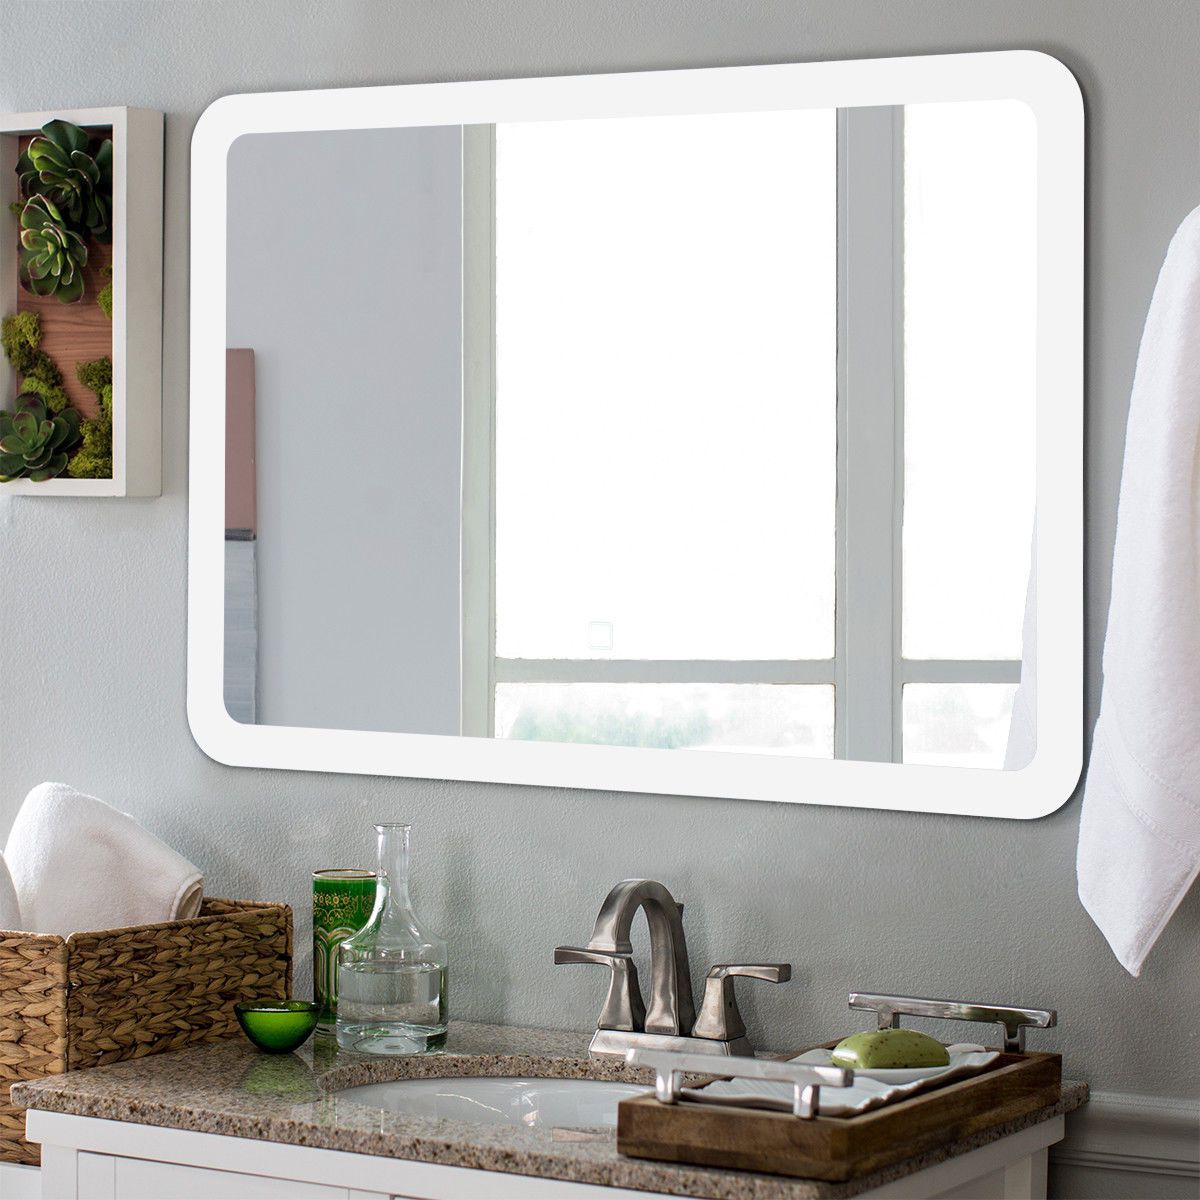 Costway Led Wall Mounted Mirror Bathroom Makeup Illuminated Rounded Arc Within Cut Corner Wall Mirrors (View 5 of 15)